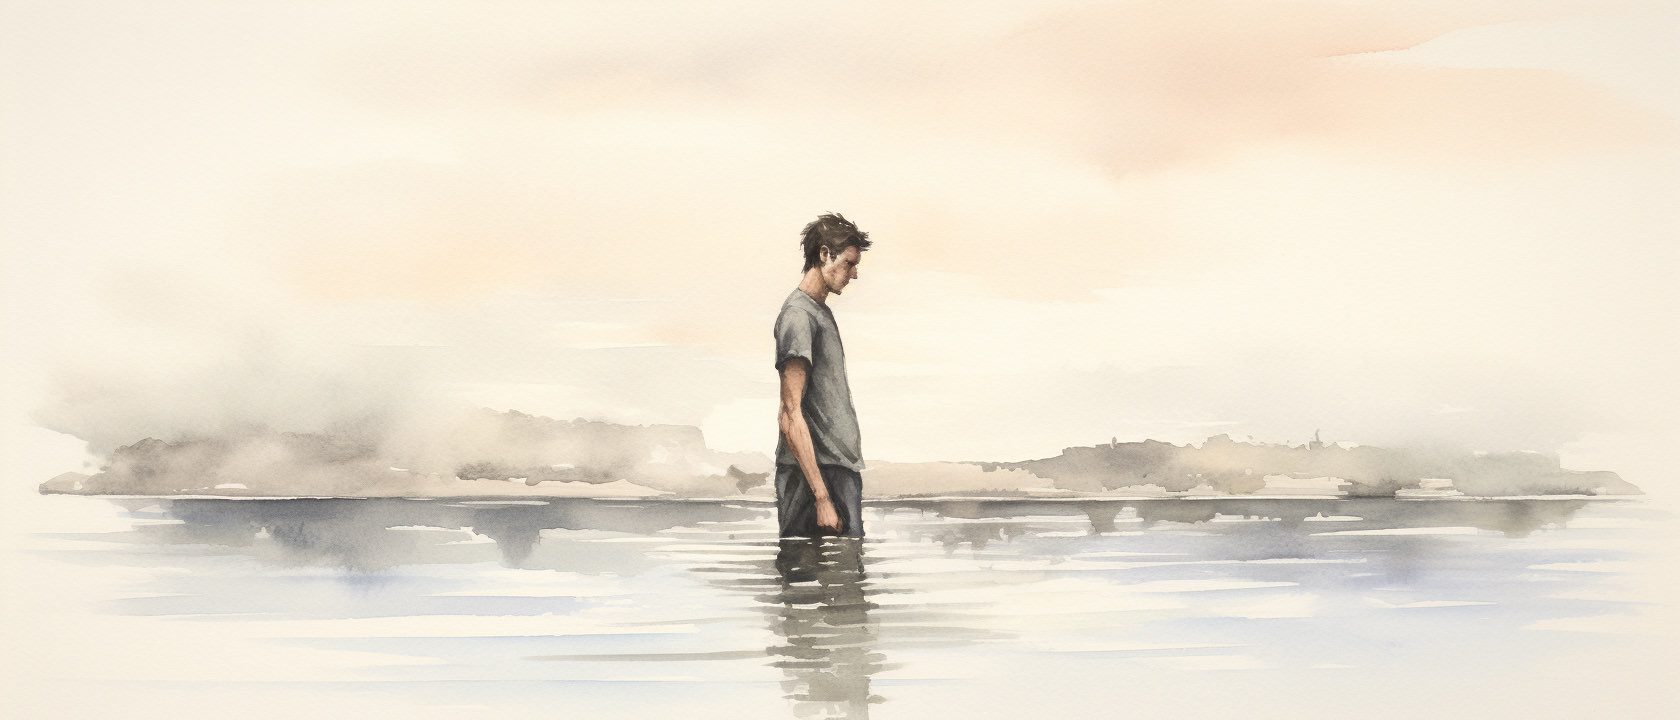 painting of a man standing in the water with head down, desolate, powerless